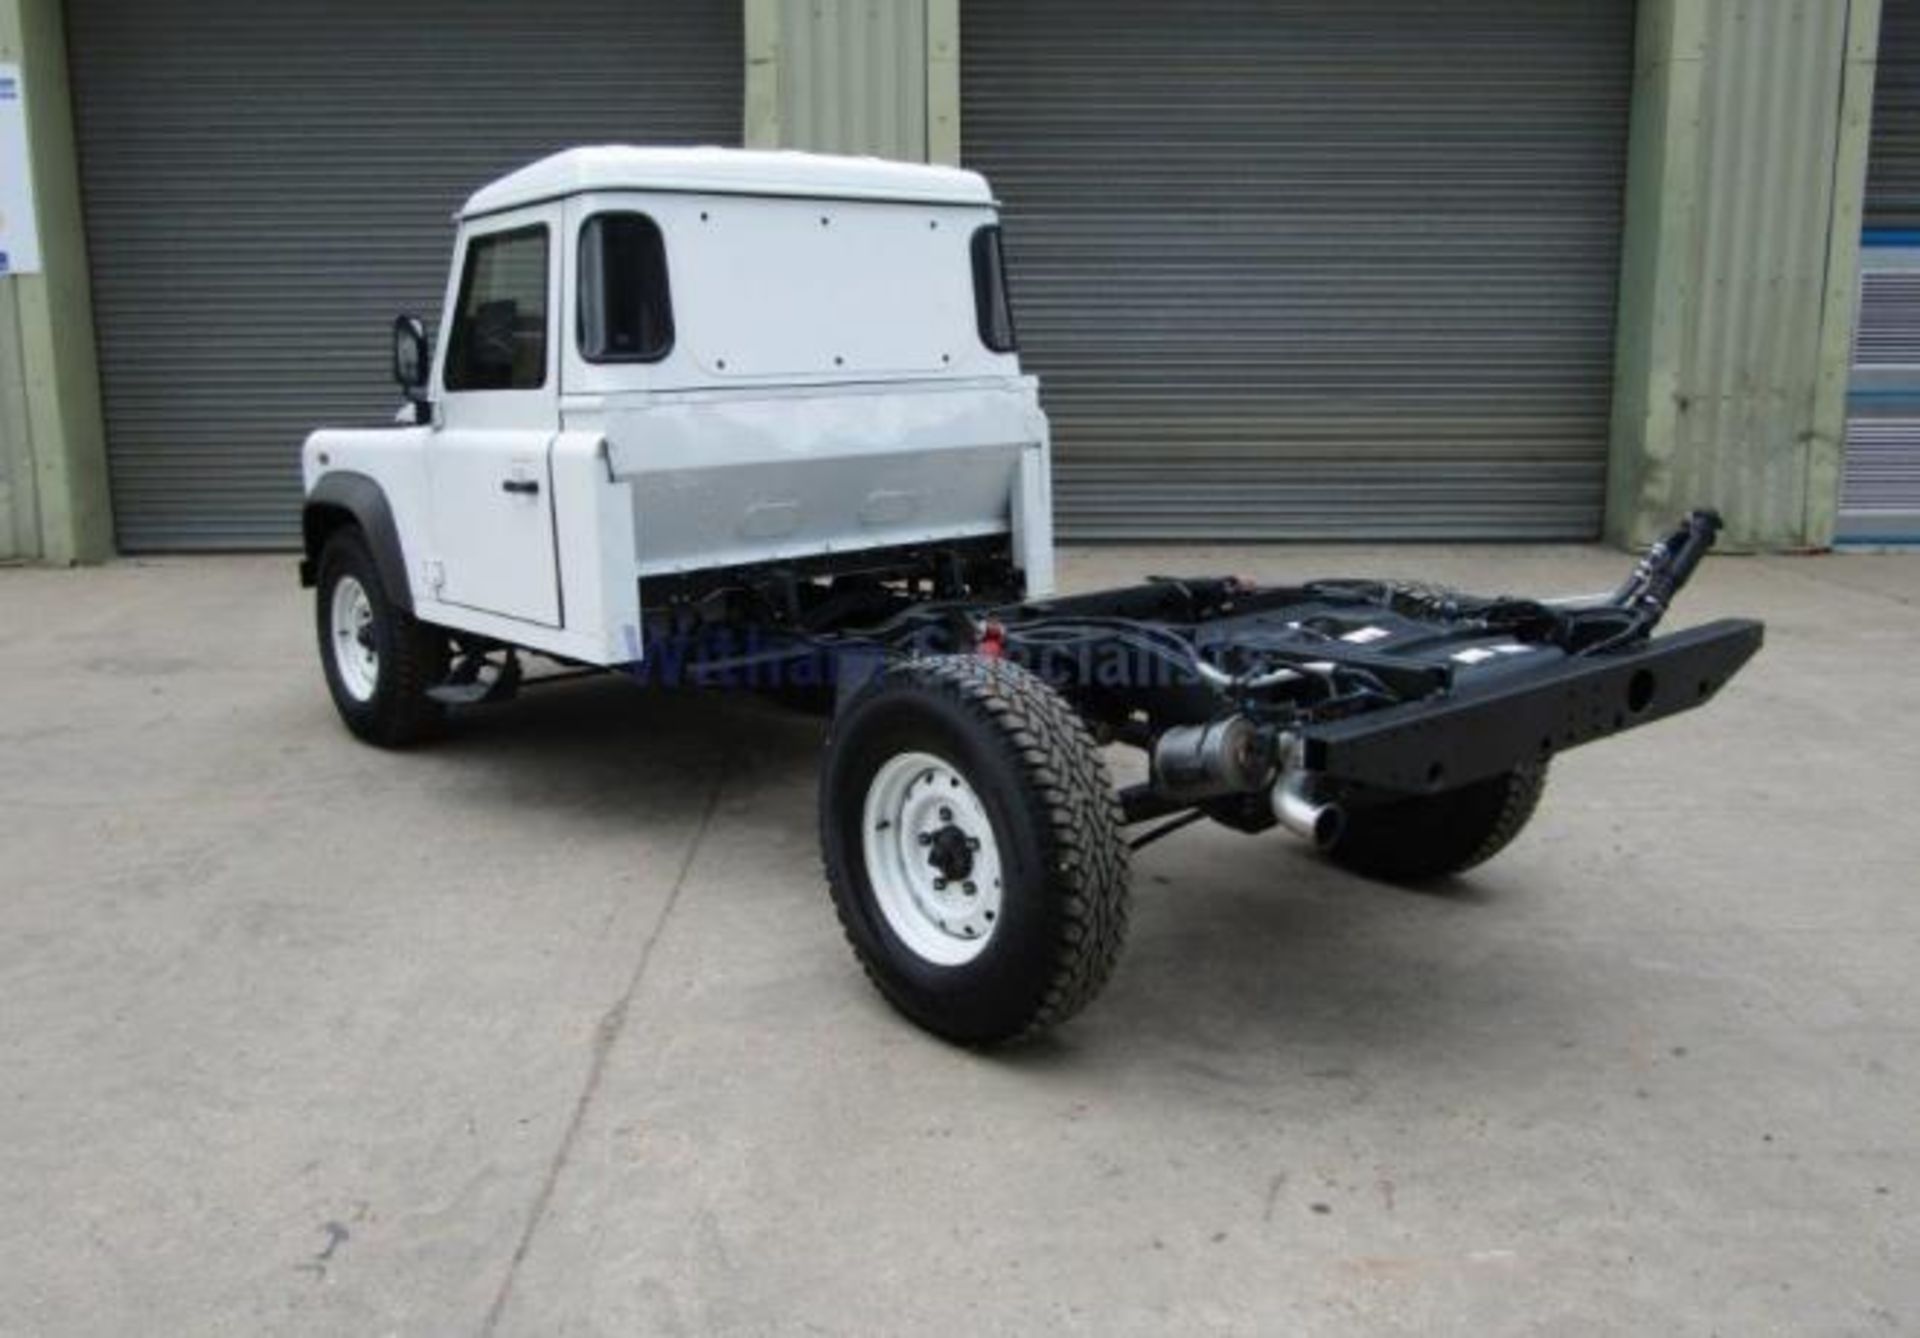 NEW UNUSED Export Specification Land Rover Defender Armoured 130 Chassis Cab - Bild 8 aus 19